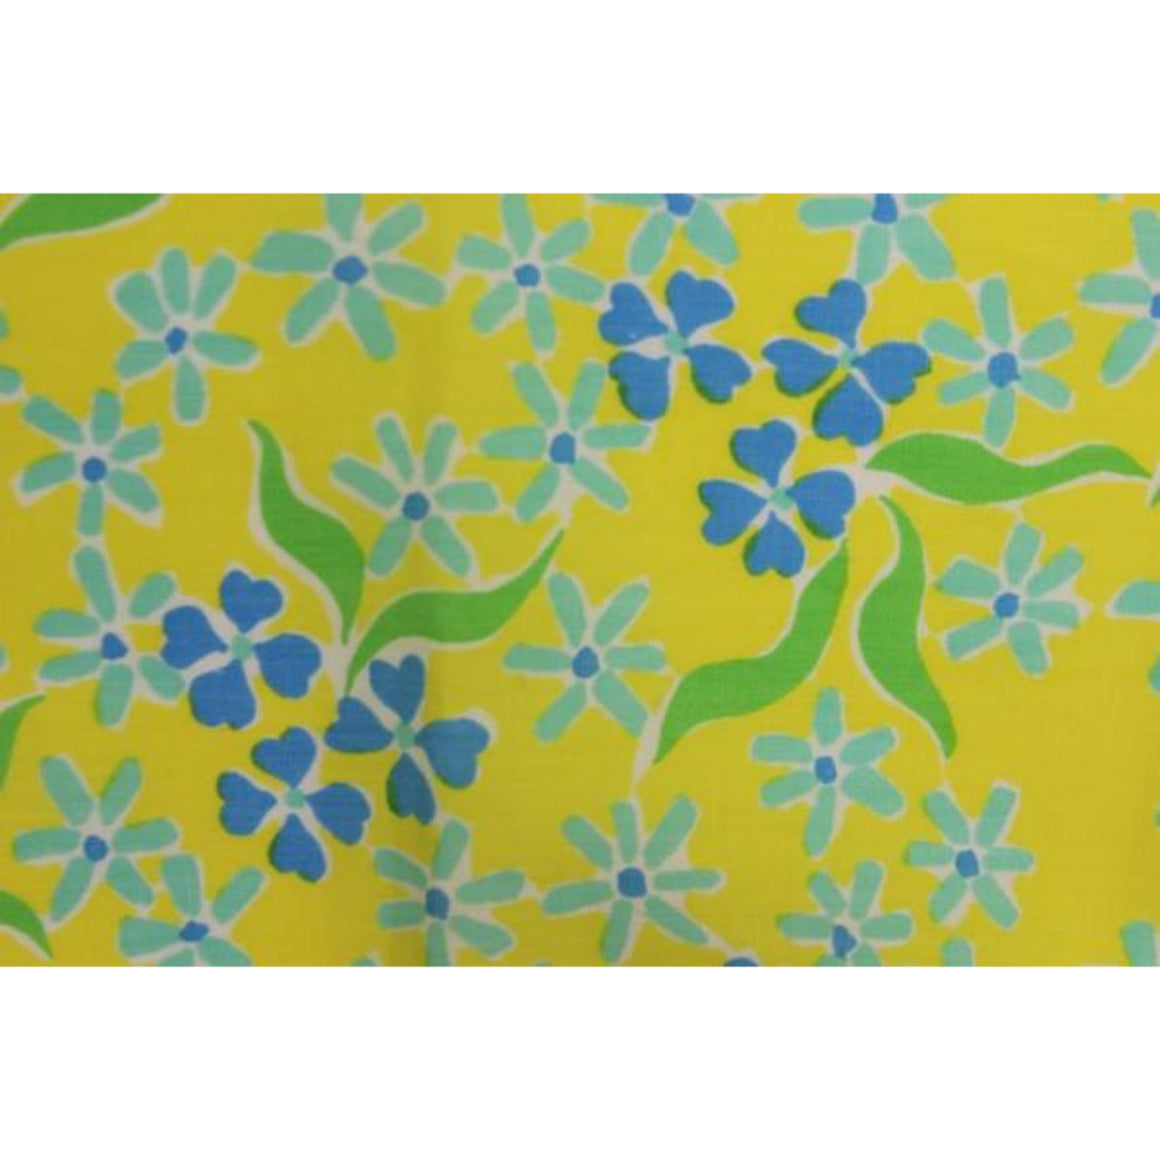 Set of 4 Lilly Pulitzer c.1960's Yellow Napkins/ Pocket Sq w/ Blue Floral Pattern